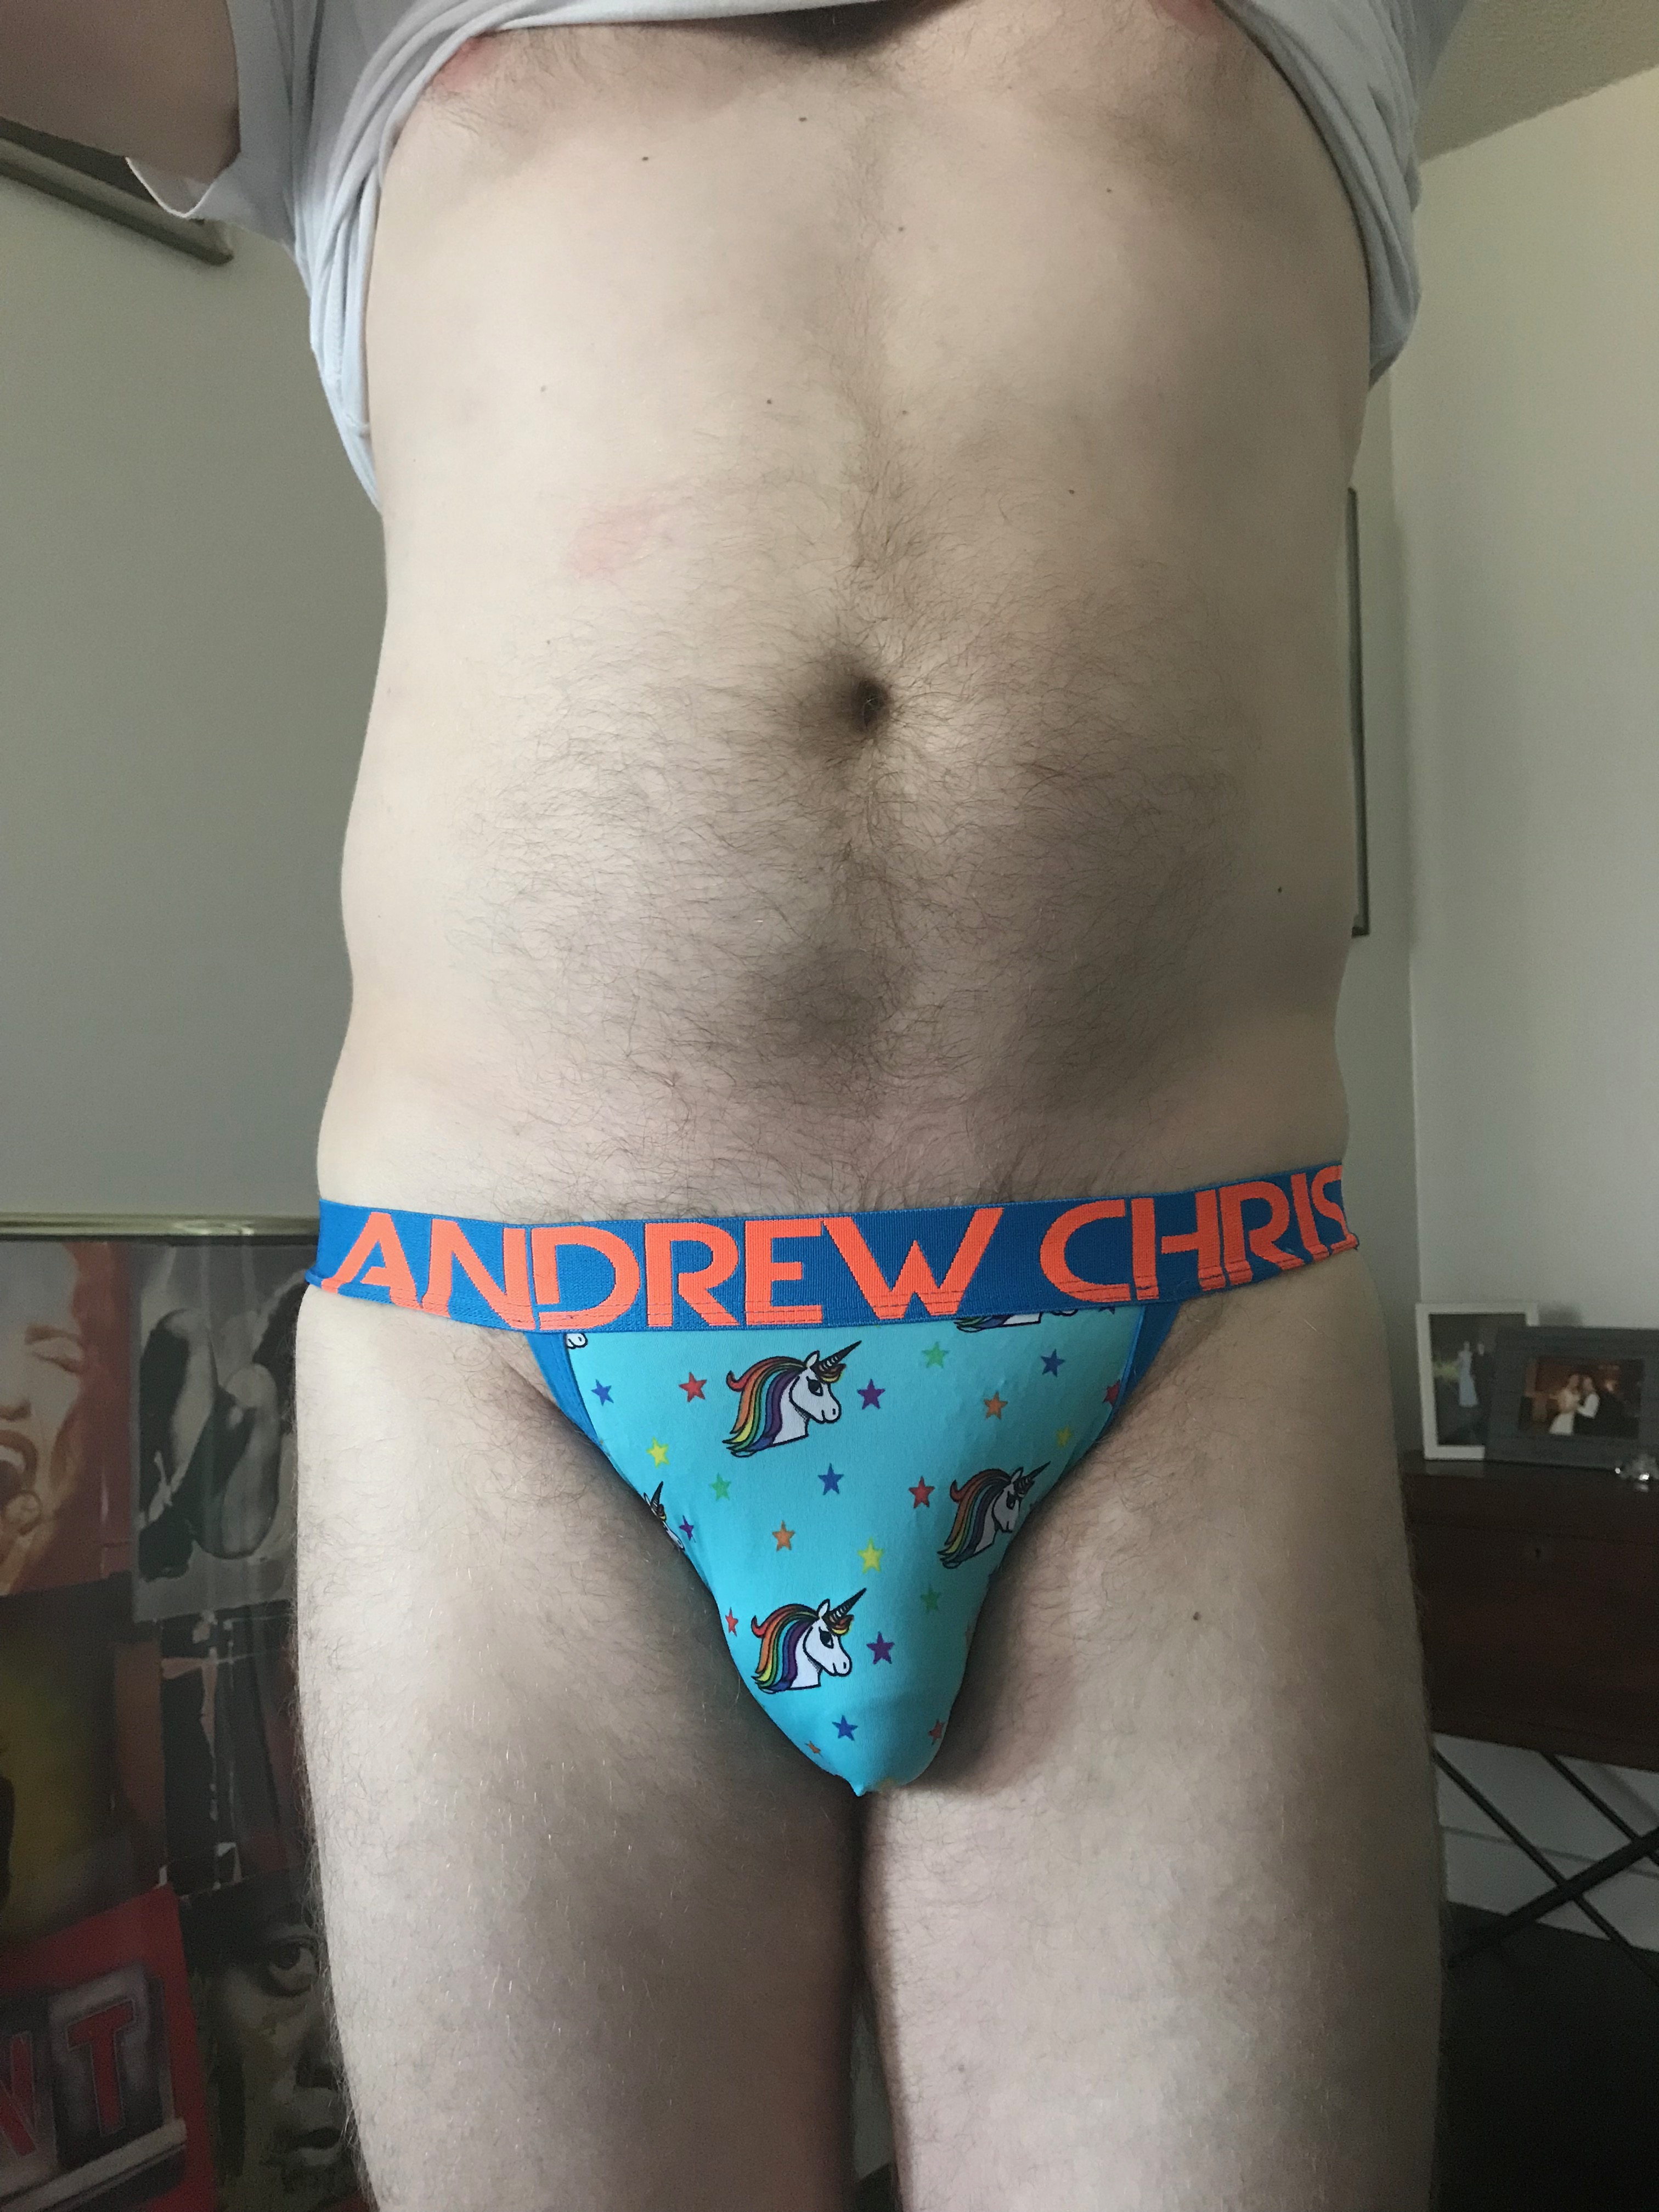 Unicorns and sparkles on a jockstrap…yes please!